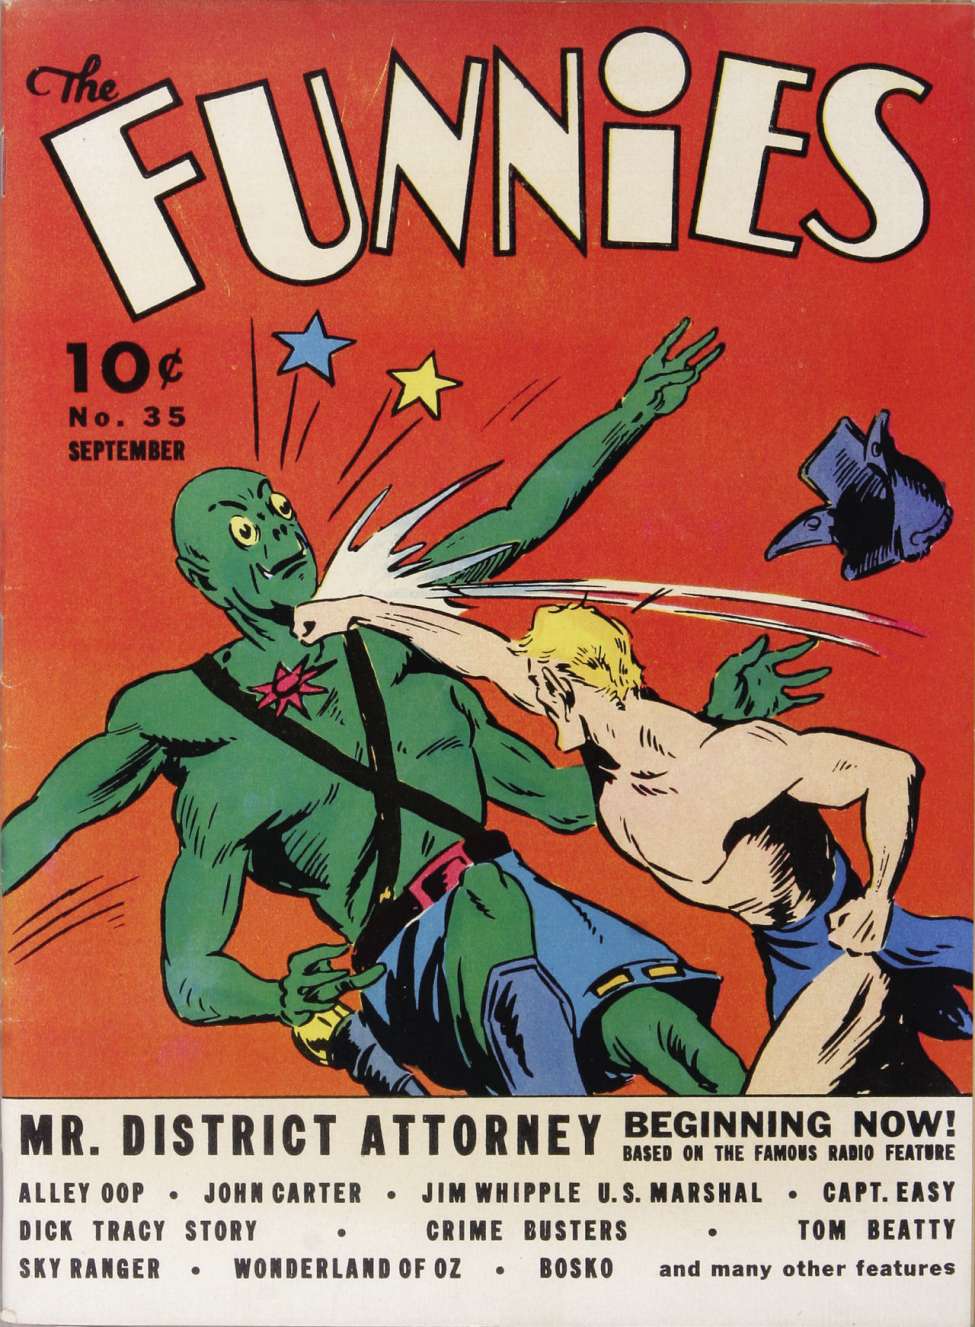 Book Cover For The Funnies 35